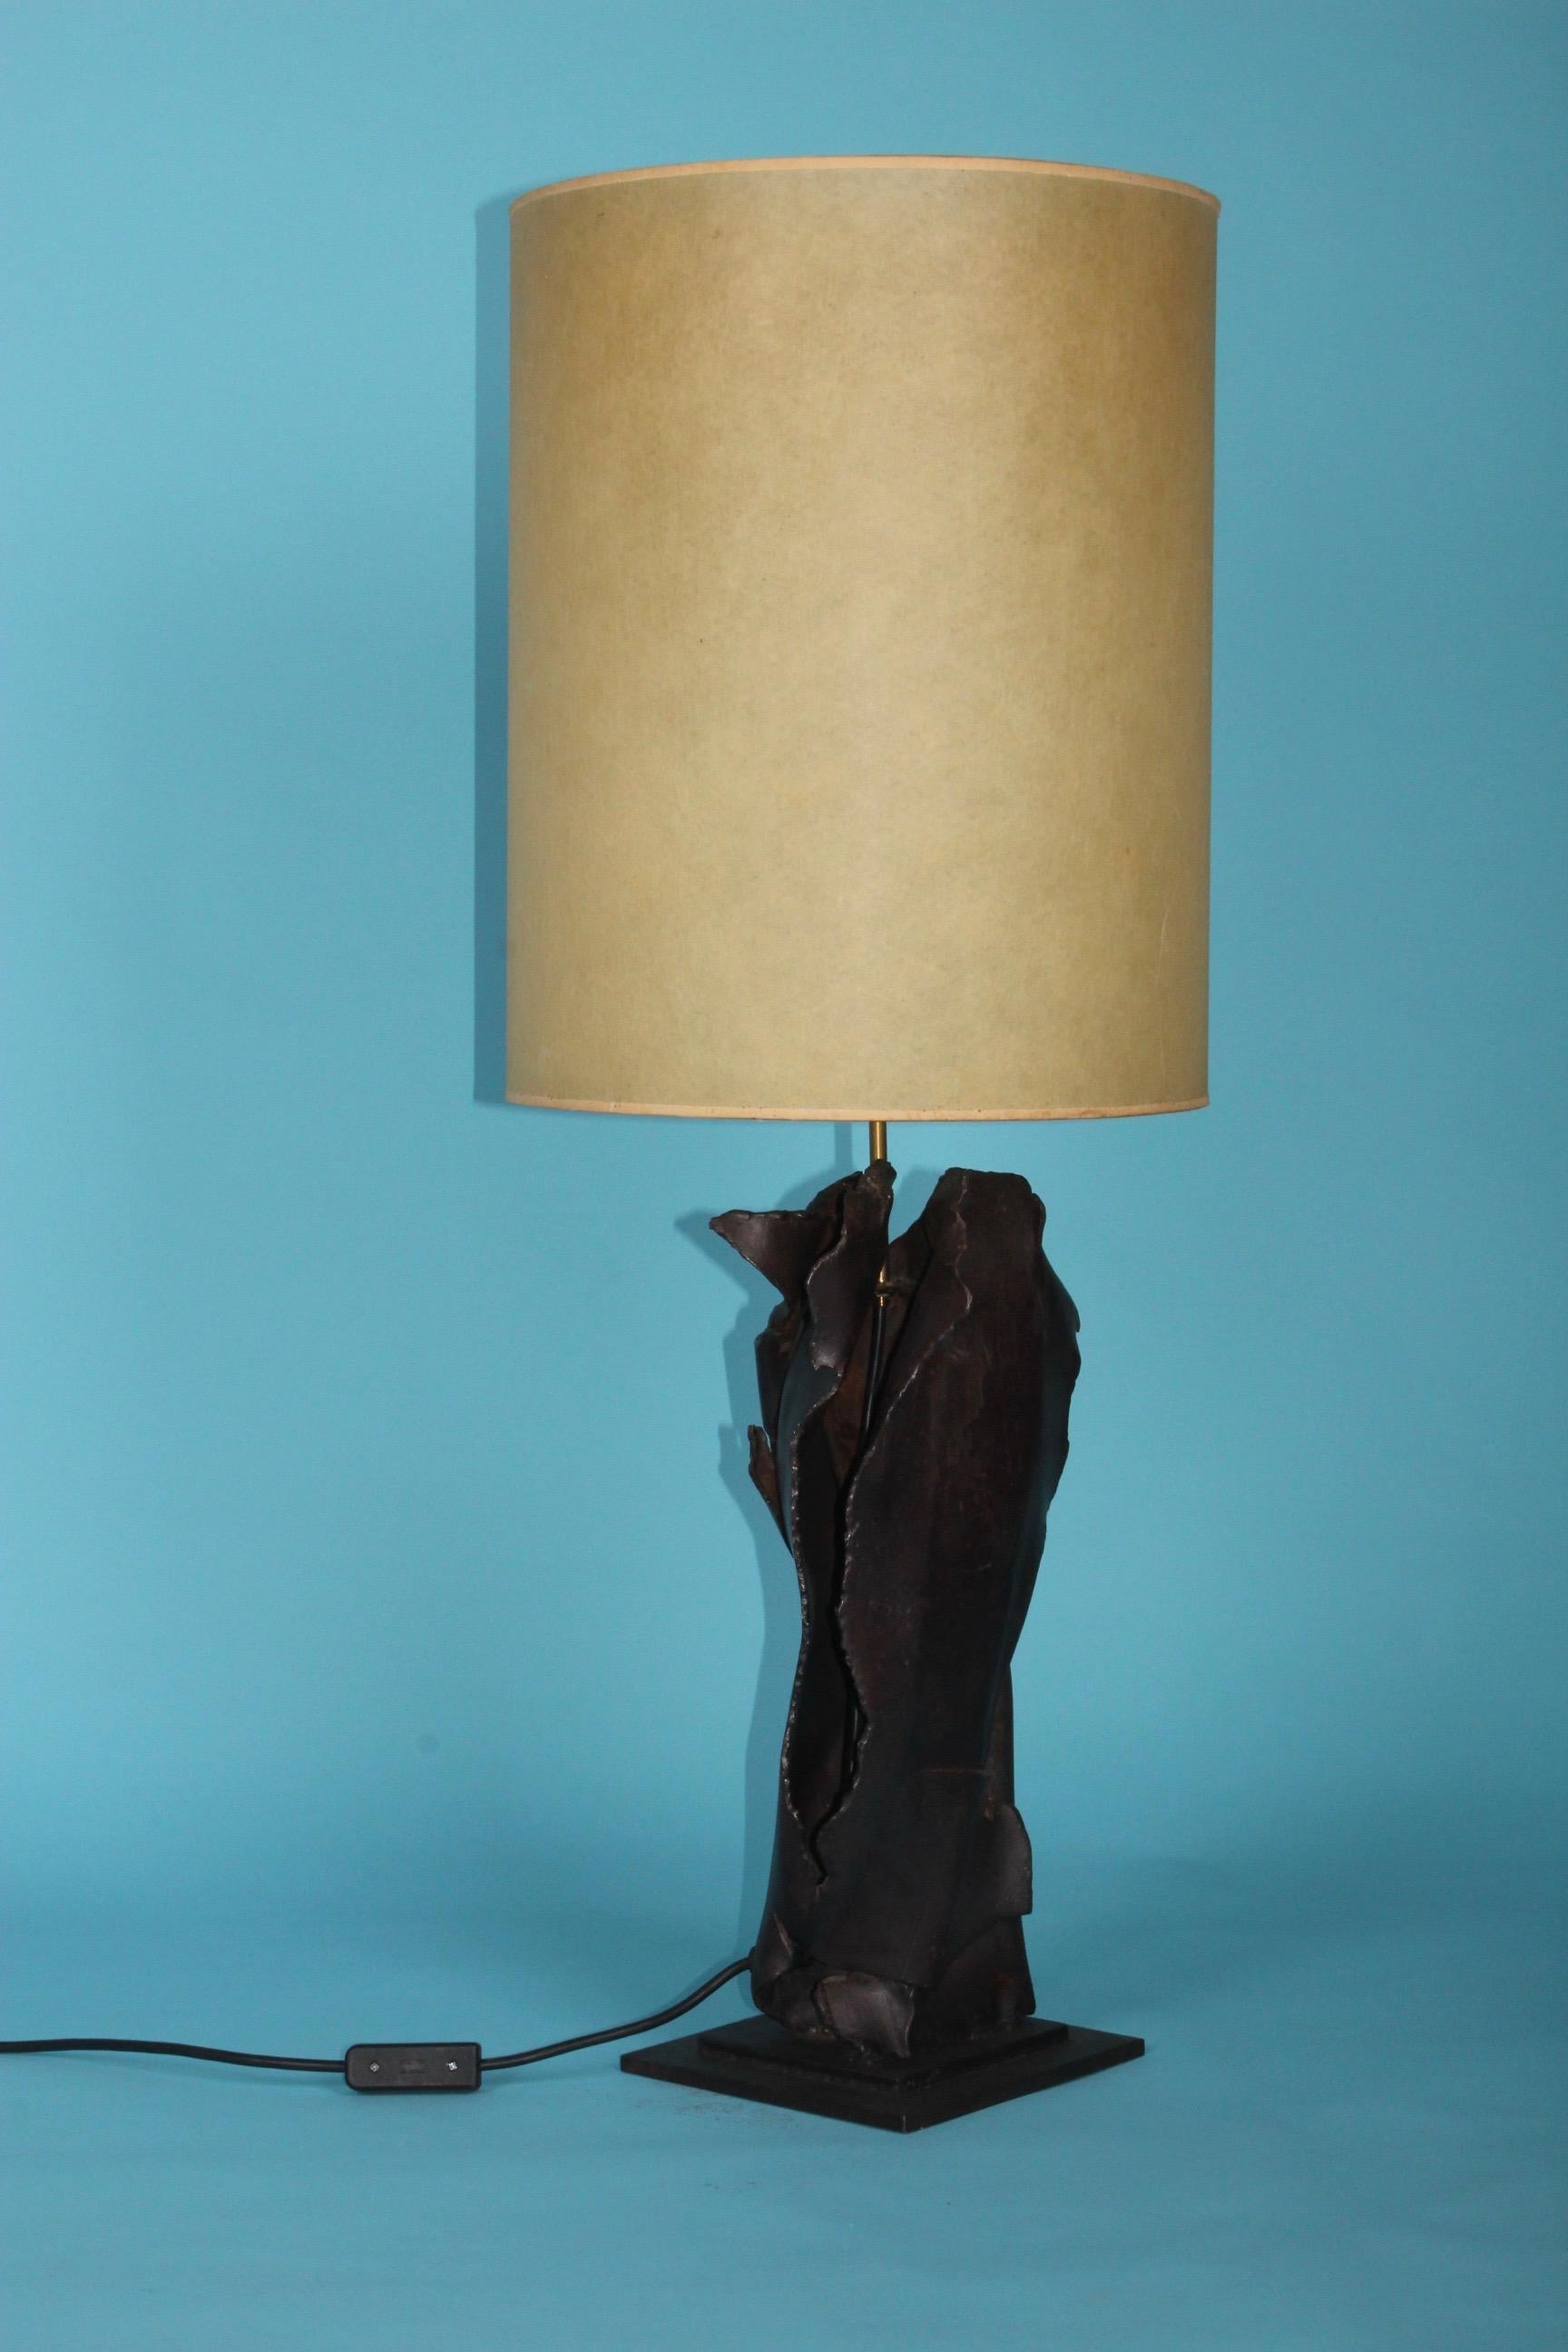 Brutalist sculpture table lamp, dimensions without shade H 104 by 21 by 21 cm.